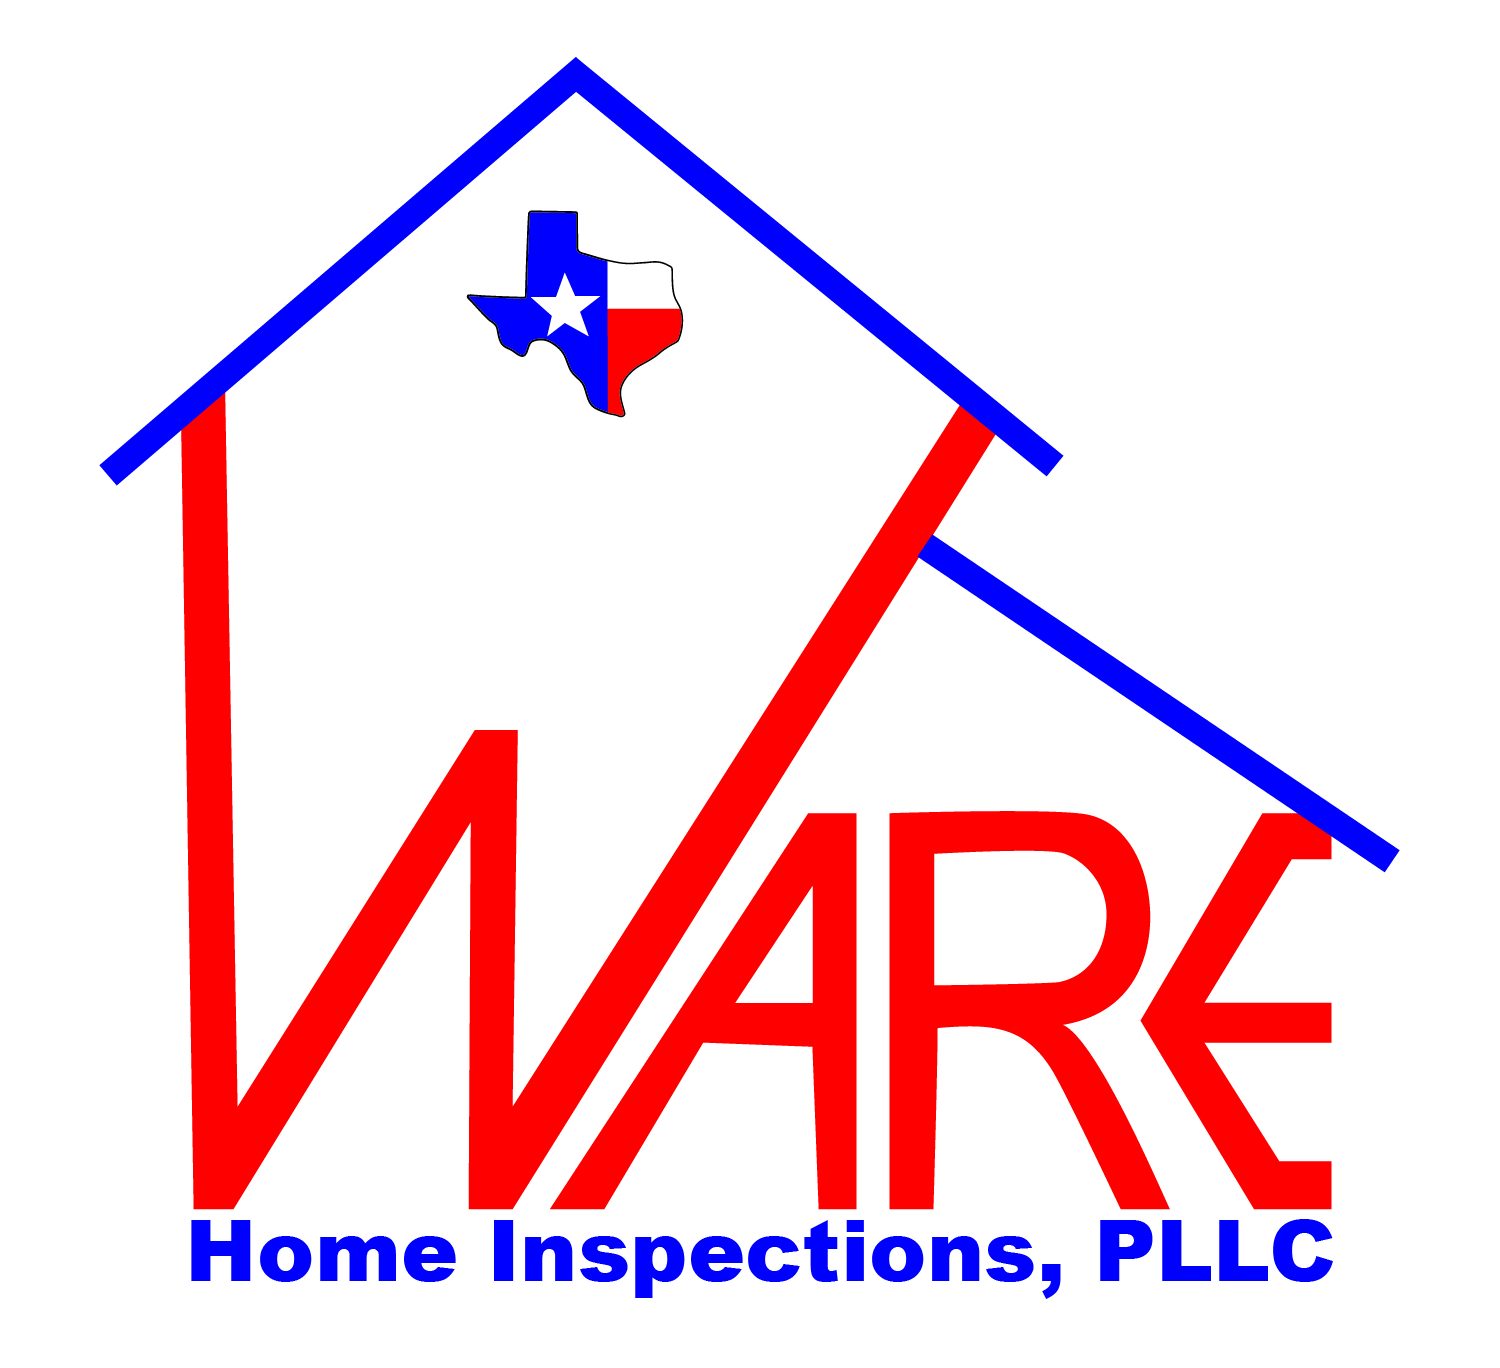 Ware Home Inspections, PLLC